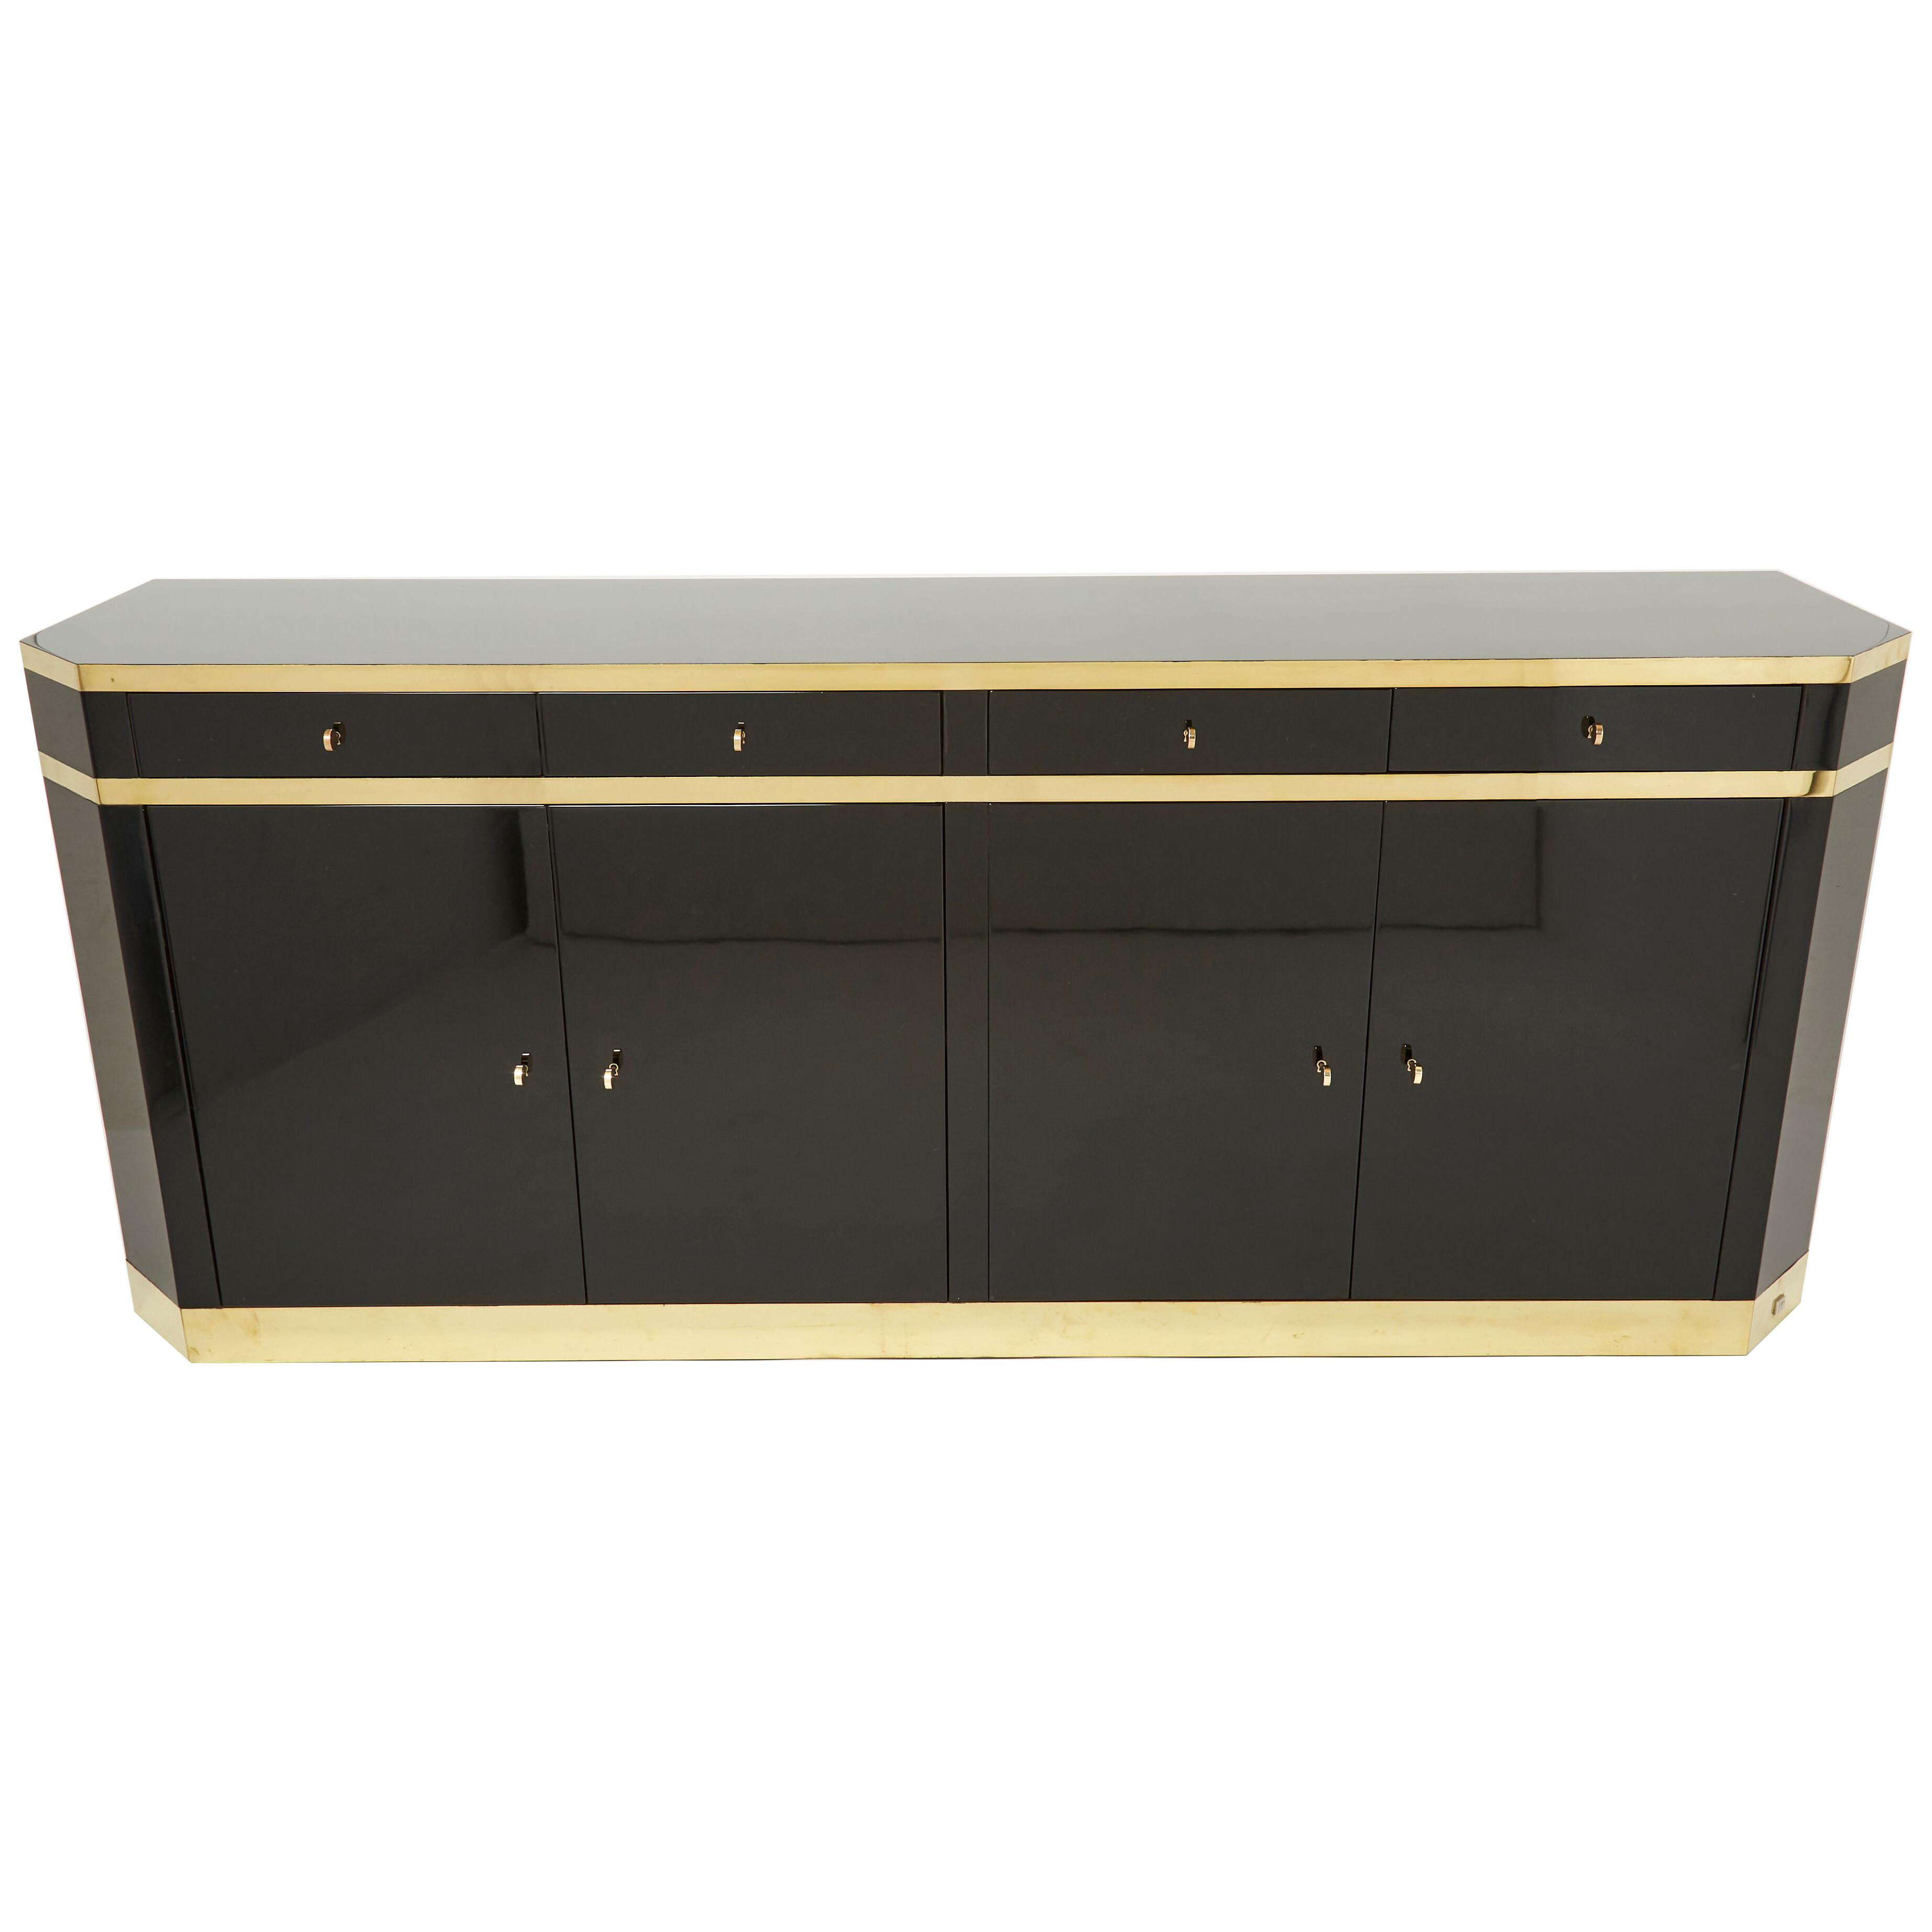 Signed J.C. Mahey brass black lacquered sideboard 1970s